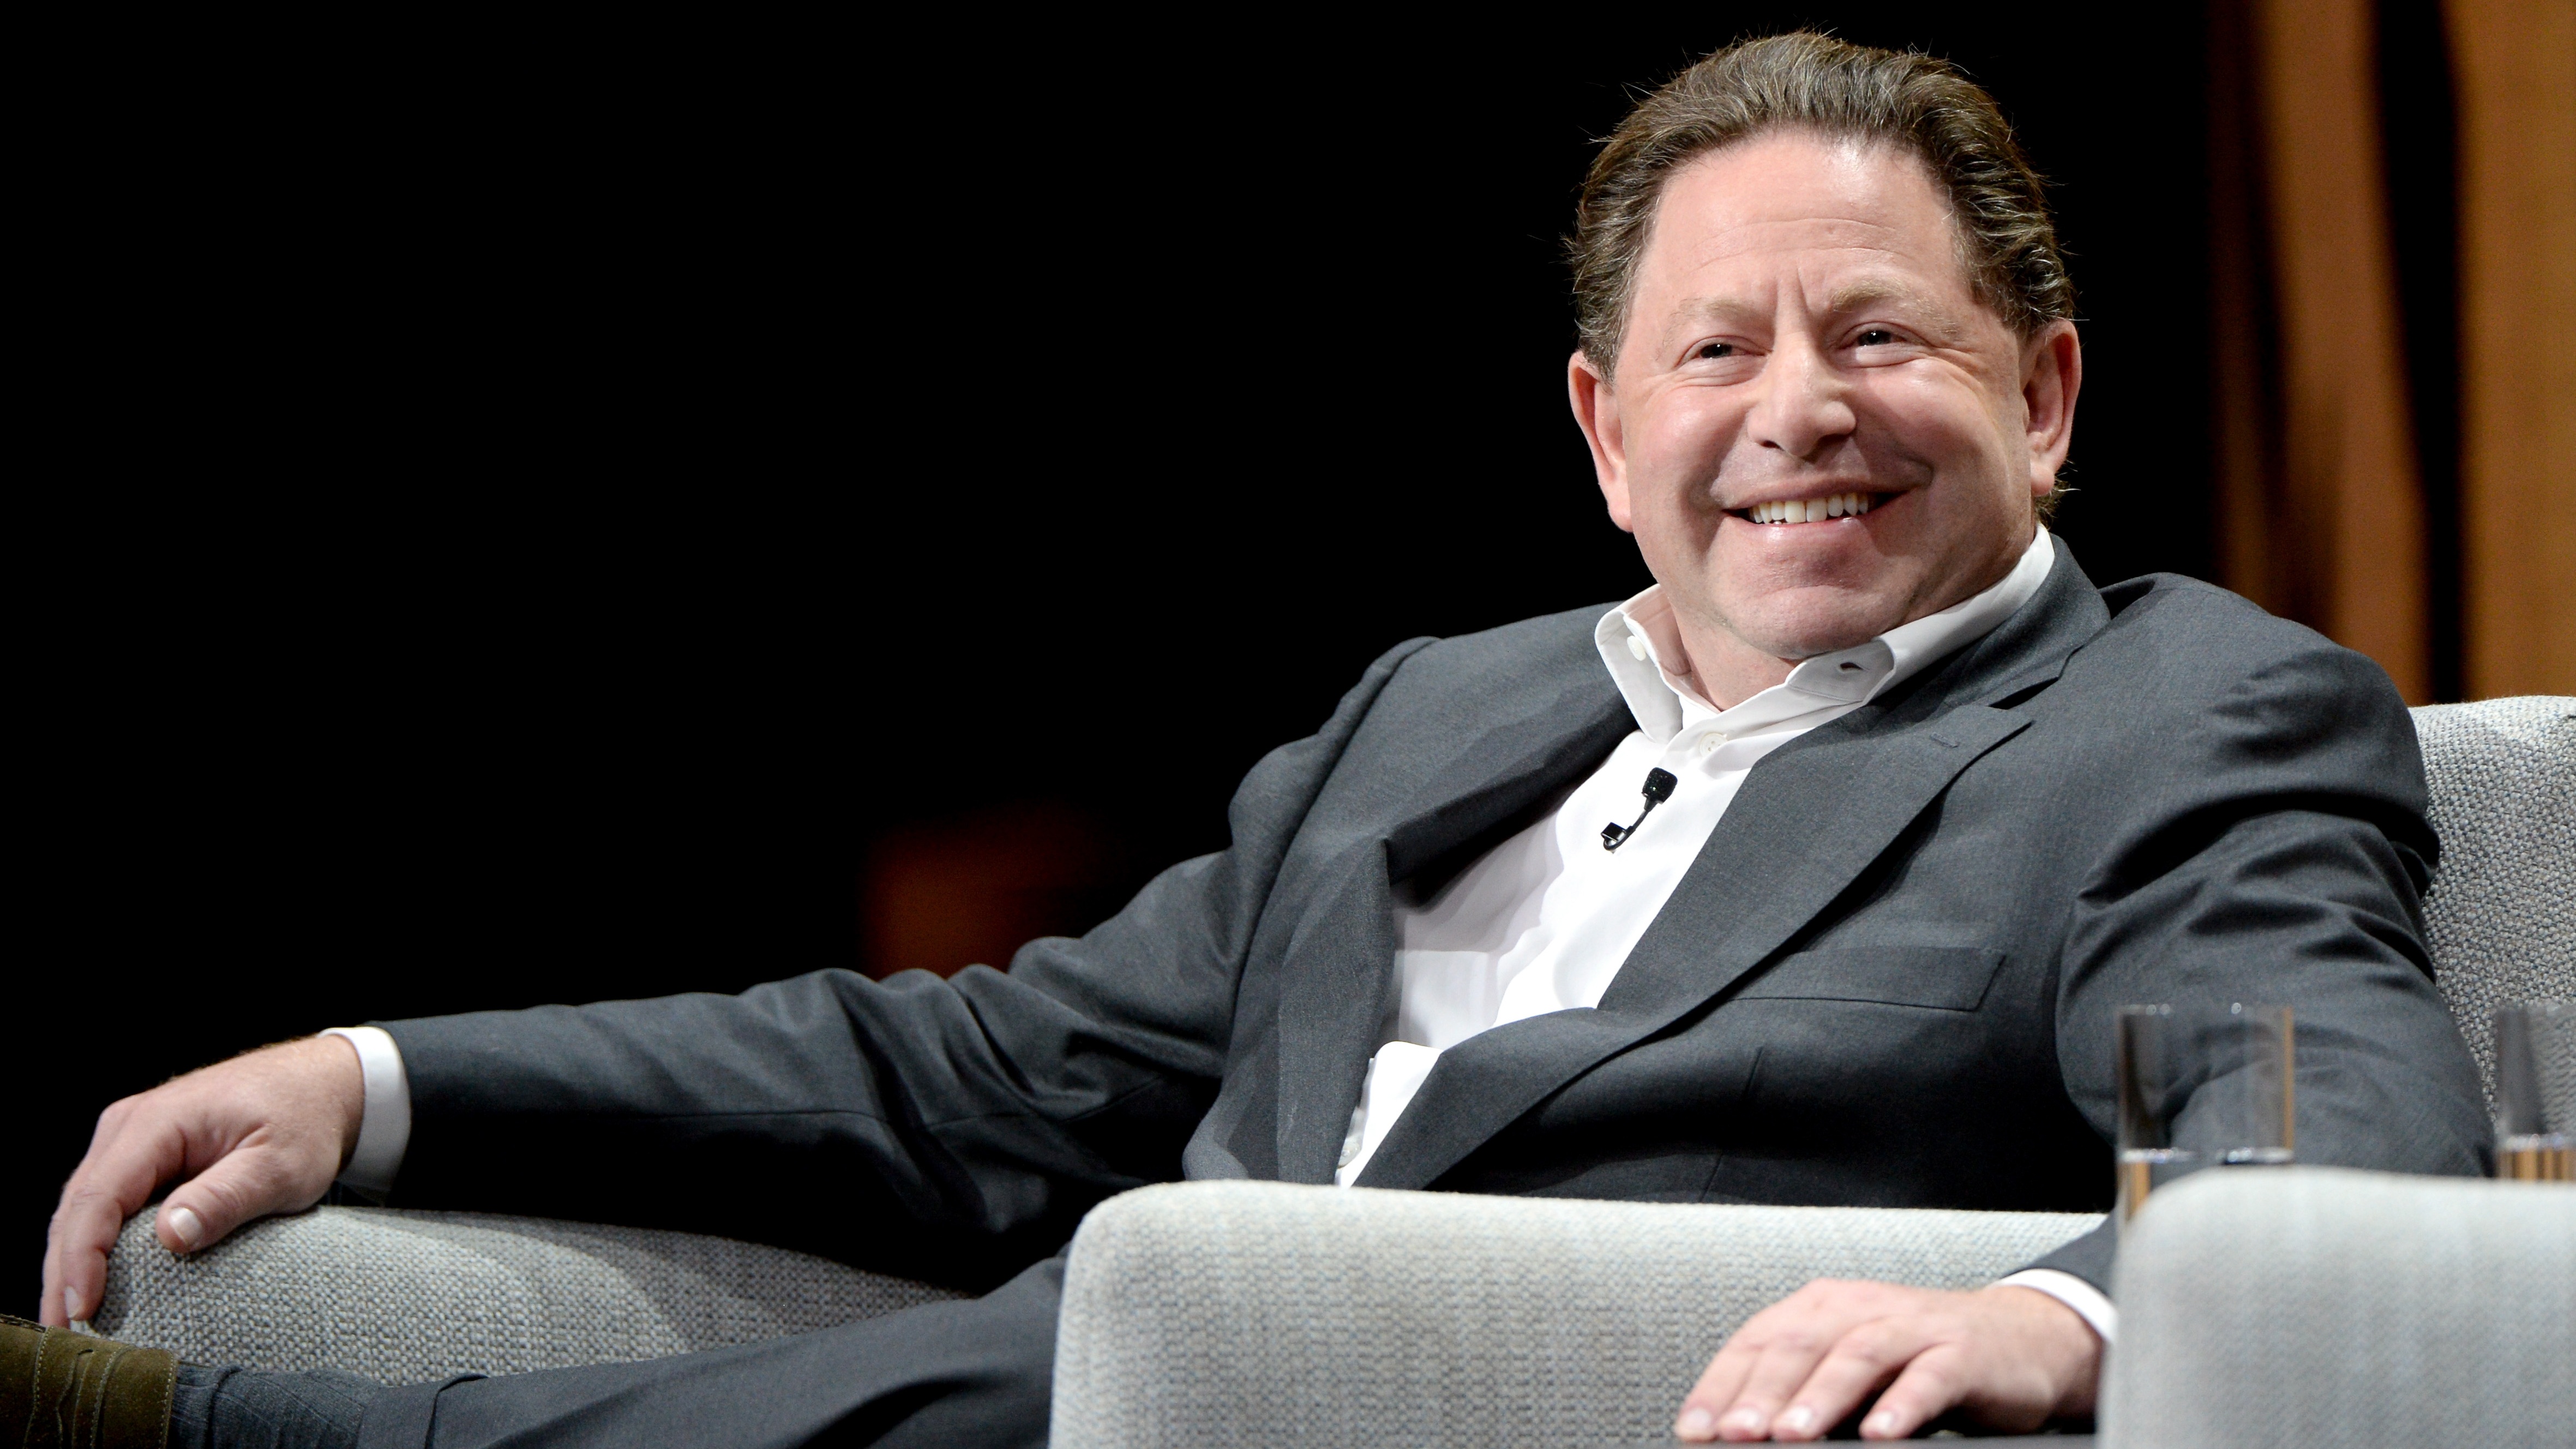  Bobby Kotick blasts UK over Microsoft deal, says regulators lack 'independent thought' and Britain risks becoming tech 'Death Valley' 